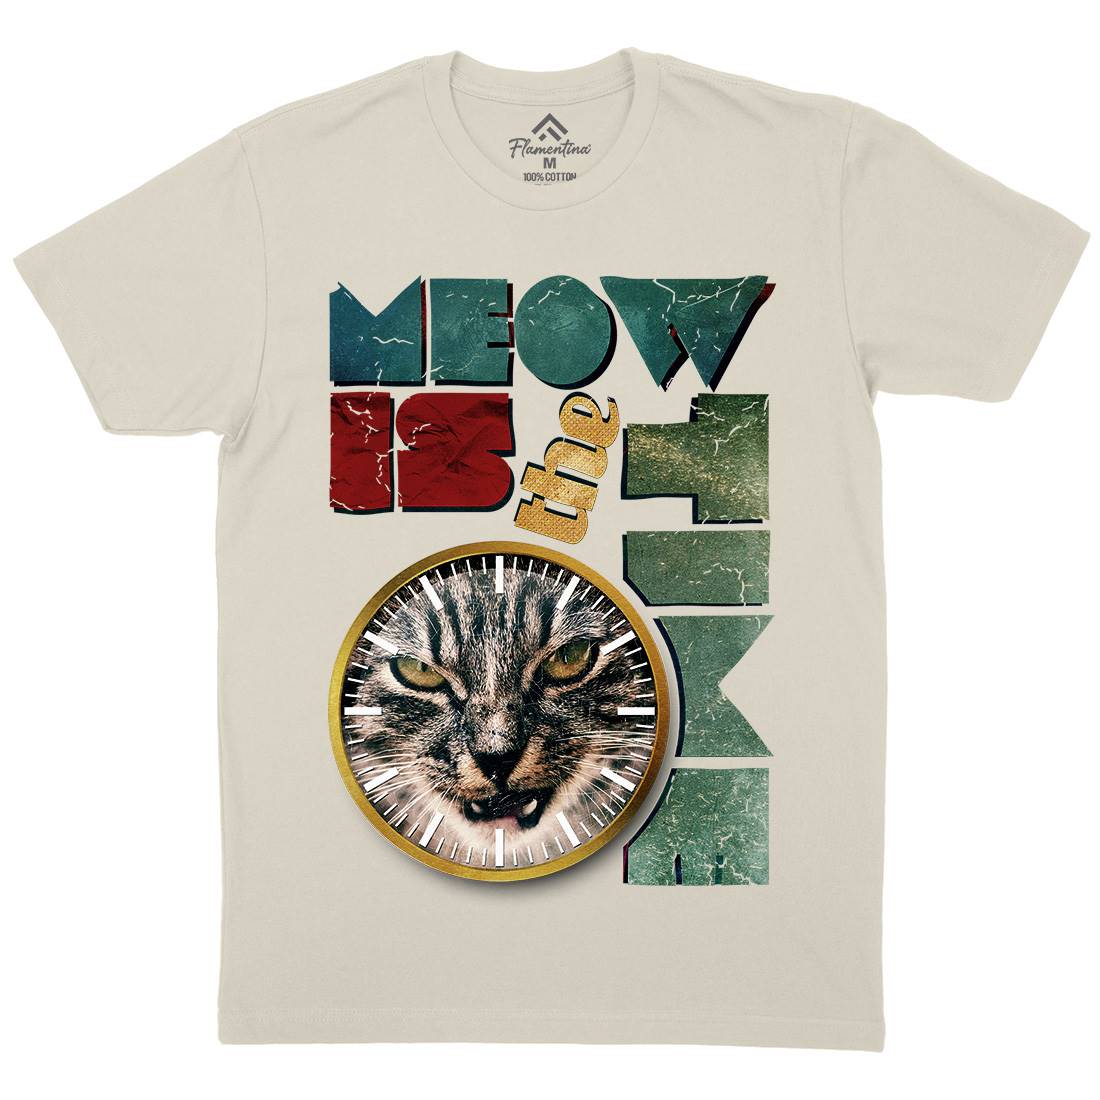 Meow Is The Time Mens Organic Crew Neck T-Shirt Animals A876